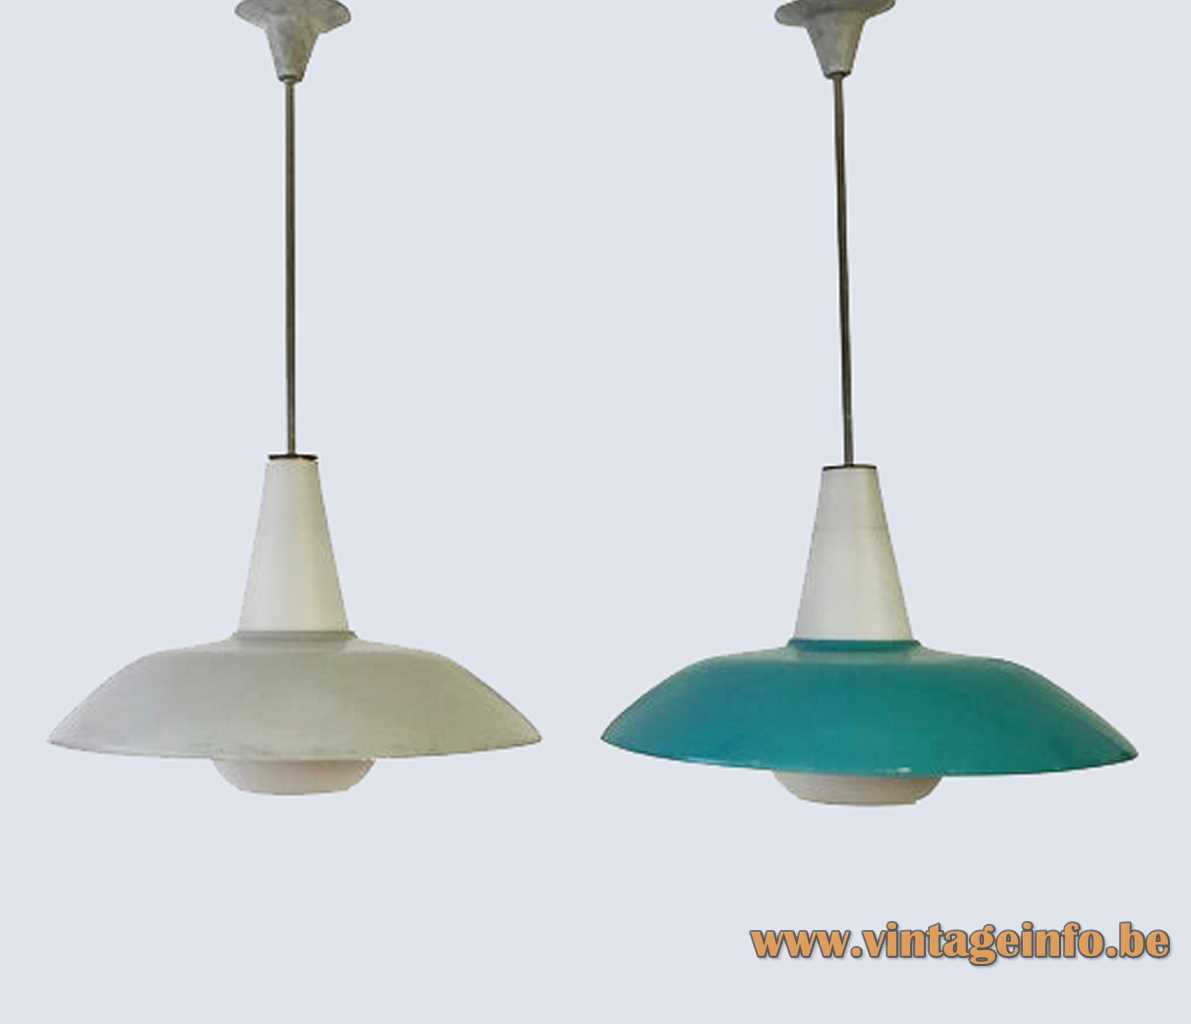 Philips 1950s pendant lamp Stockholm design Louis Kalff white opal glass diffuser round metal lampshade 1960s